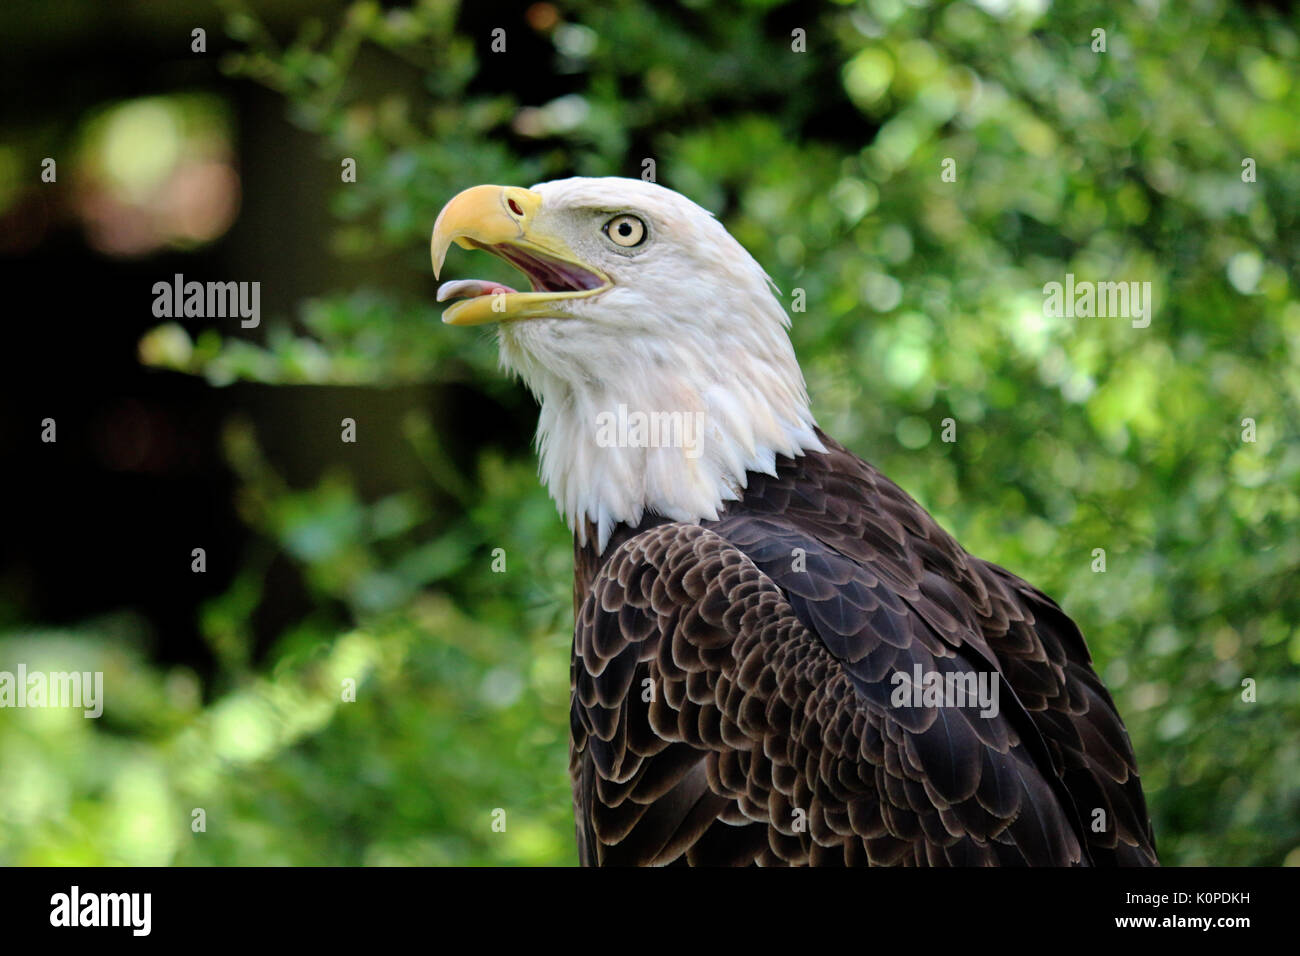 A Bald Eagle Perching on a Tree Strump with a Natural green Leaves Background. Stock Photo